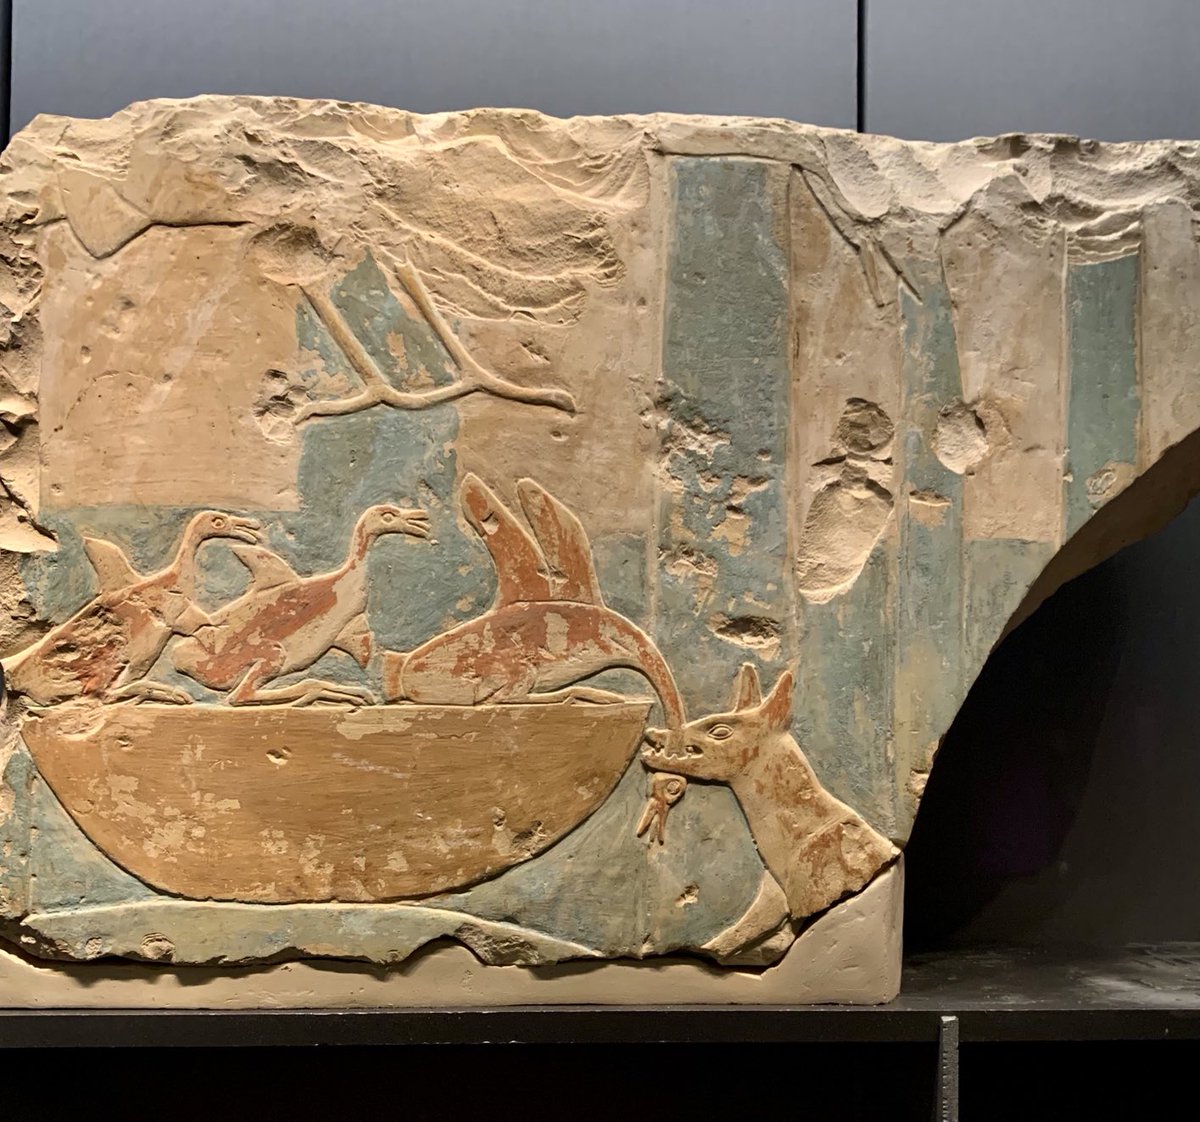 In the space between Cygnus & Aquila, Hevelius (c. 1690) put his Fox & Goose constellation. So reminded of this when I see representation of fun-stuff in Egyptian sky. Motif first appeared 6th Dyn. From 11th Dyn temple of #Montuhotep 2nd, Deir el Bahri. #FitzwilliamMuseum E5.1906